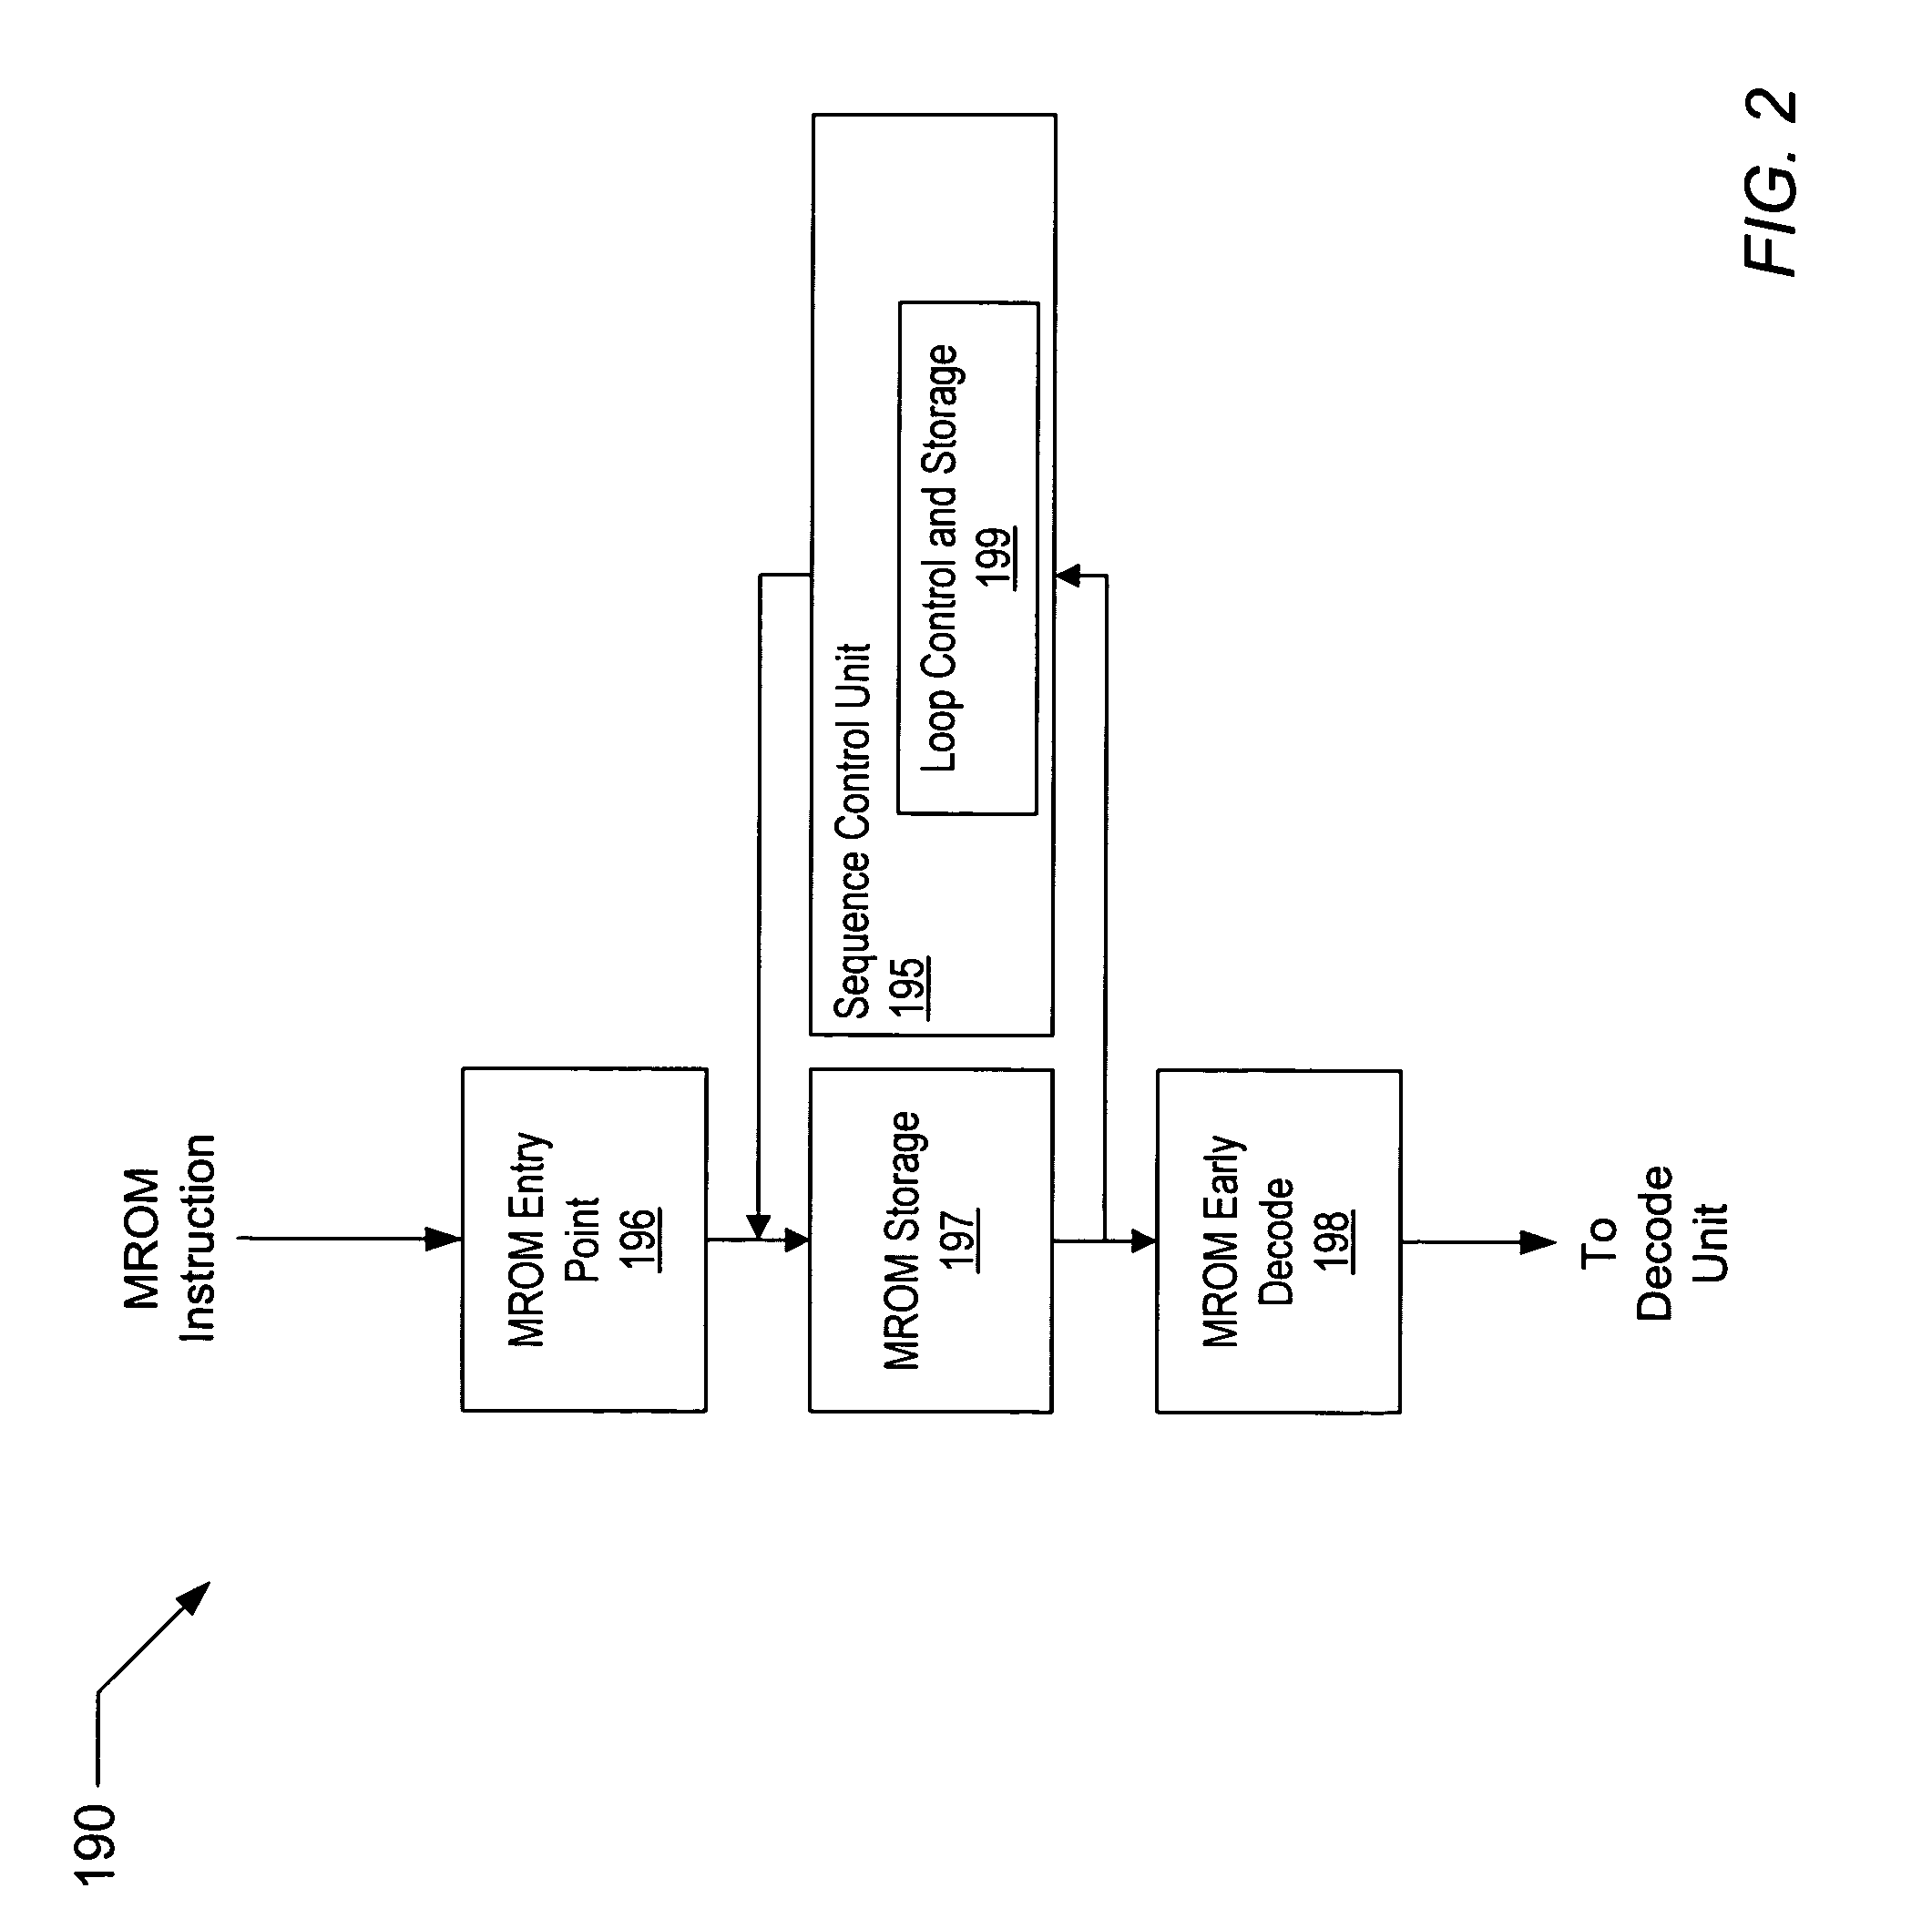 Method for optimizing loop control of microcoded instructions